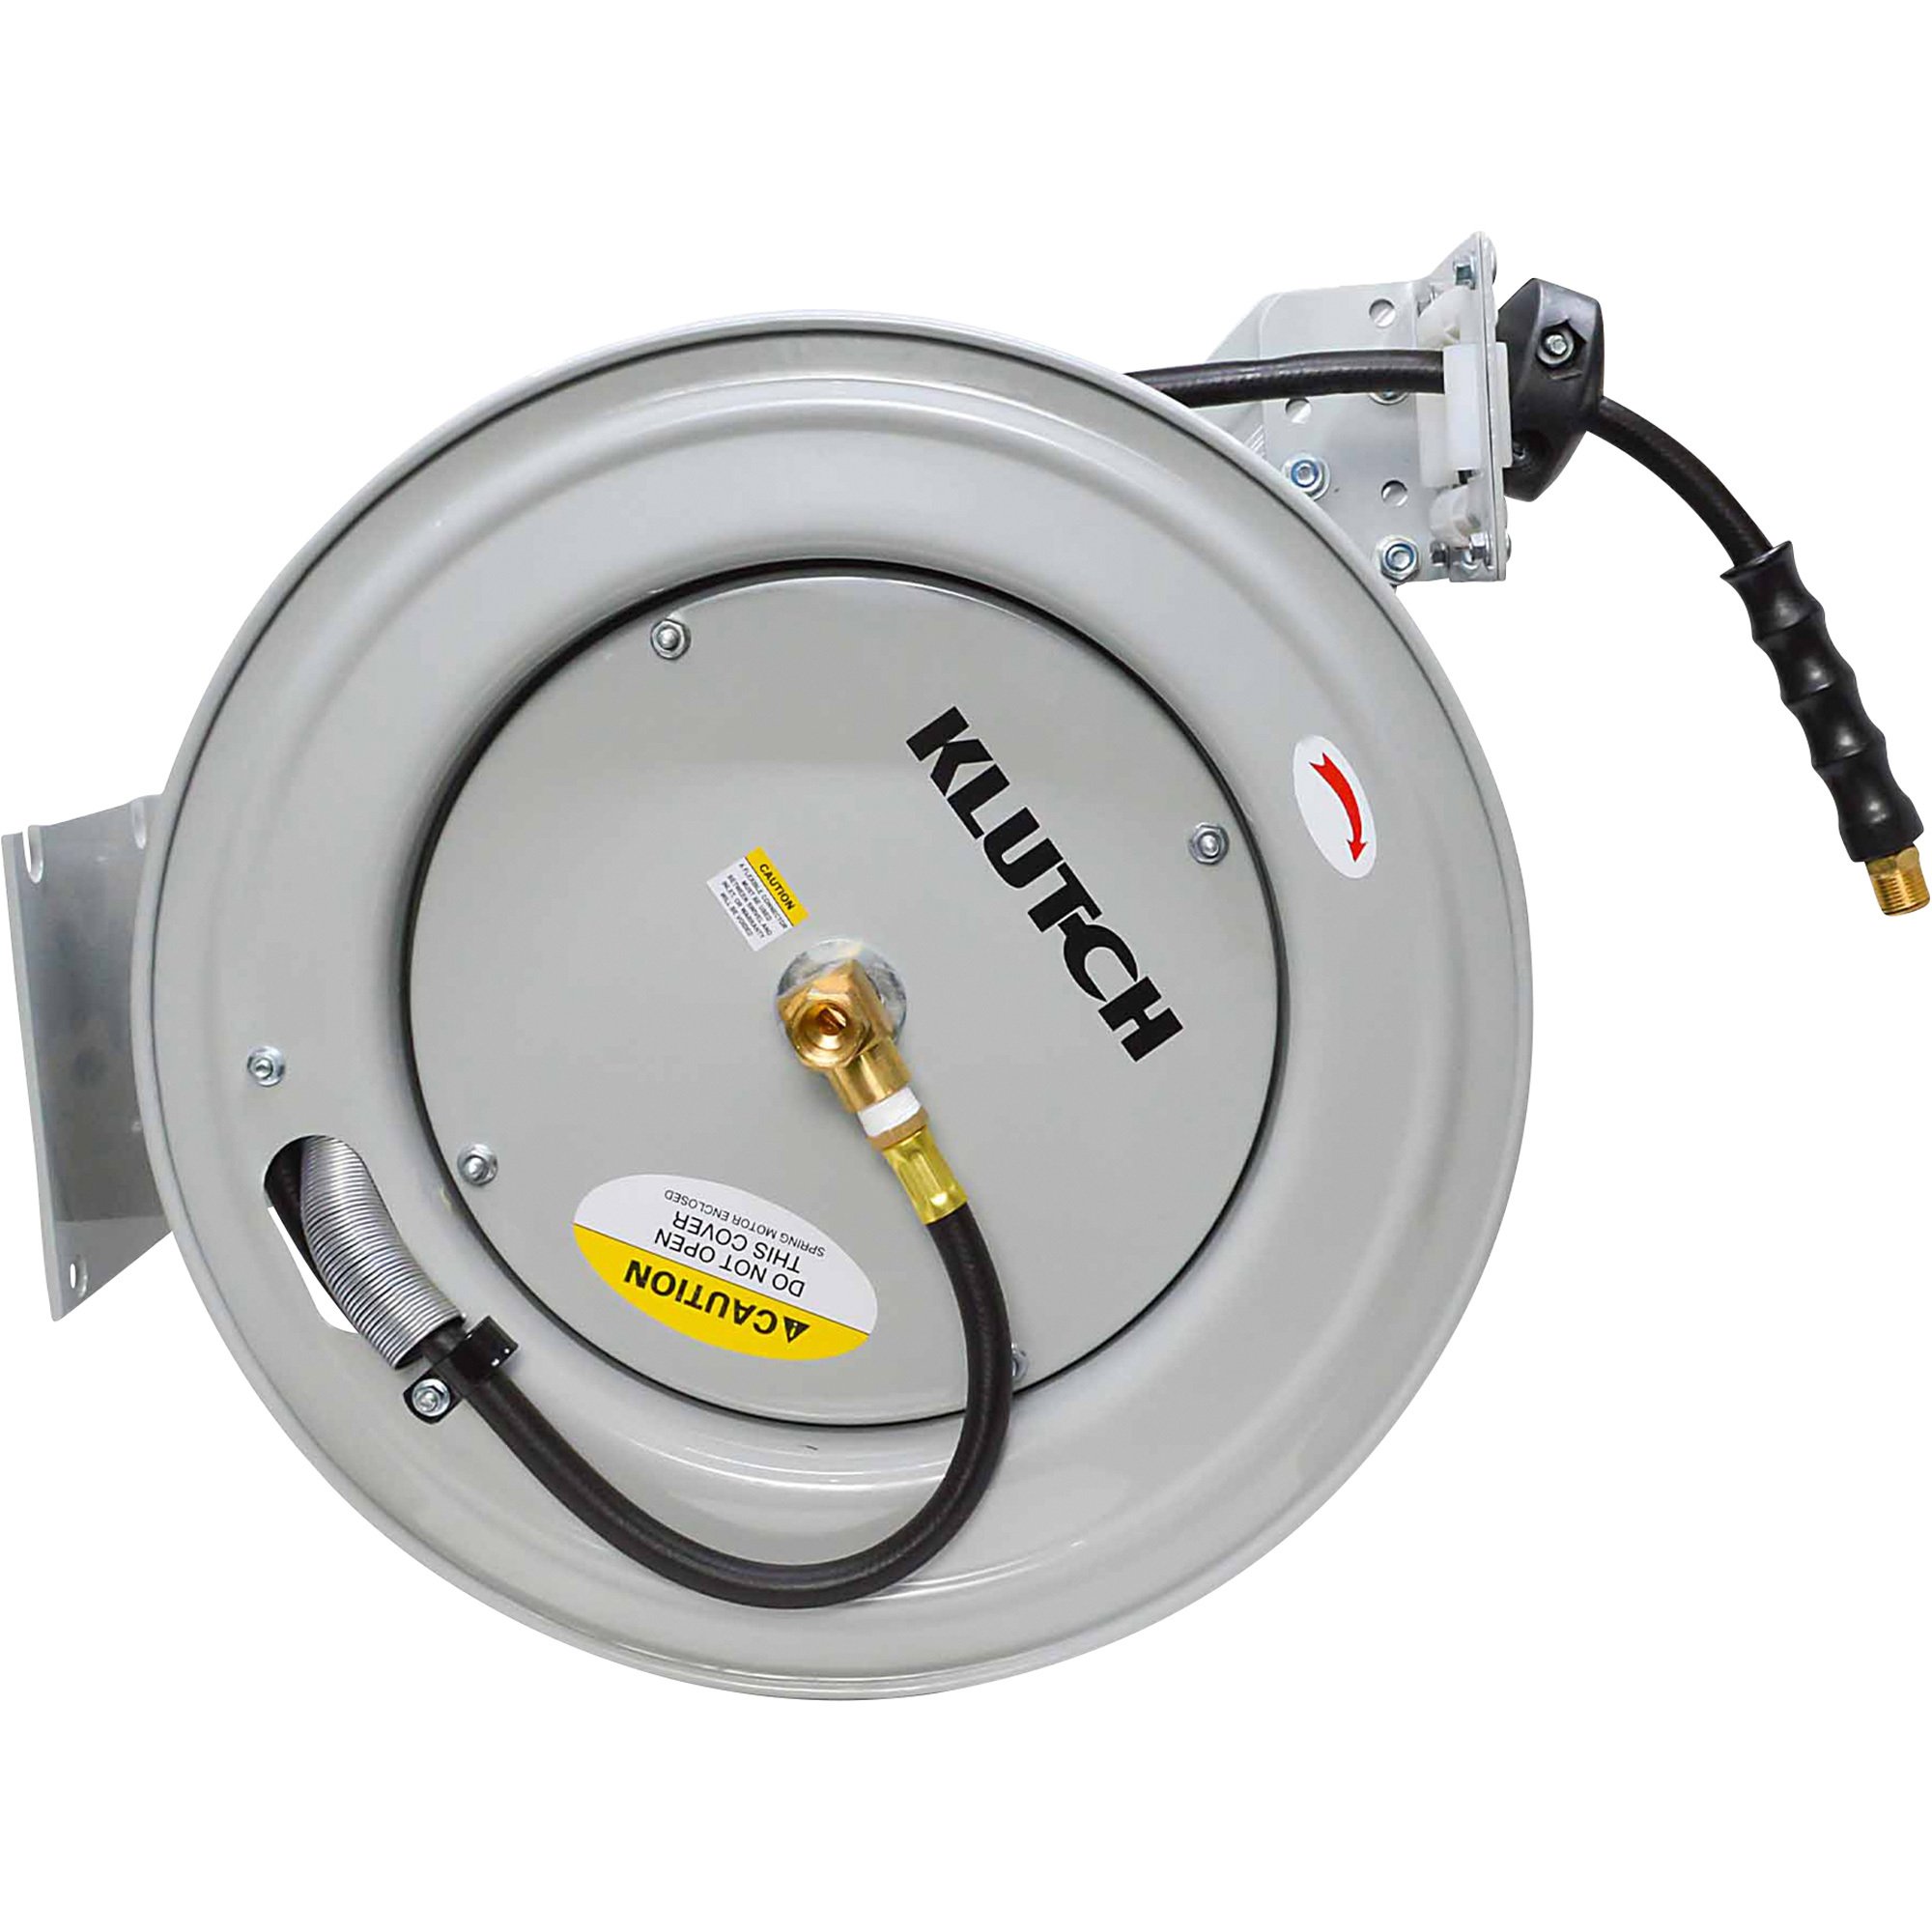 Klutch Auto-Rewind Air Hose Reel - with 3/8in. x 50ft. Rubber Hose, 300 psi, Size: 18.5 in 73430